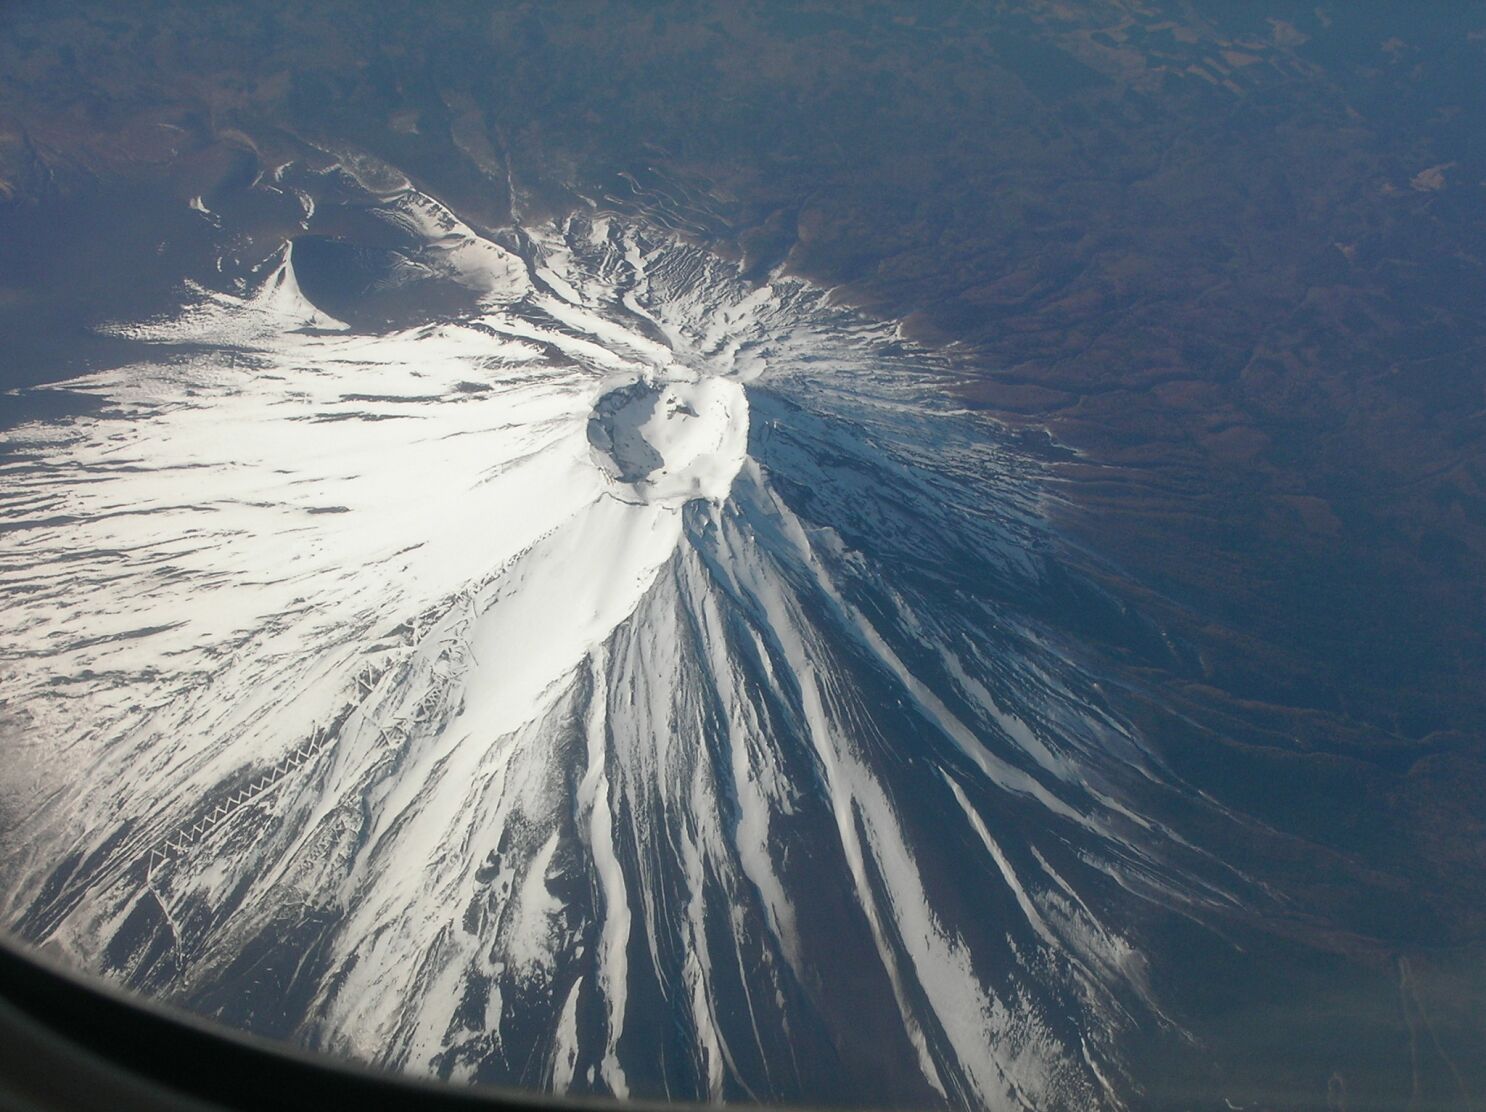 kold svulst Limited Look, I'm on top of Mt. Fuji right now using Instagram! - Los Angeles Times